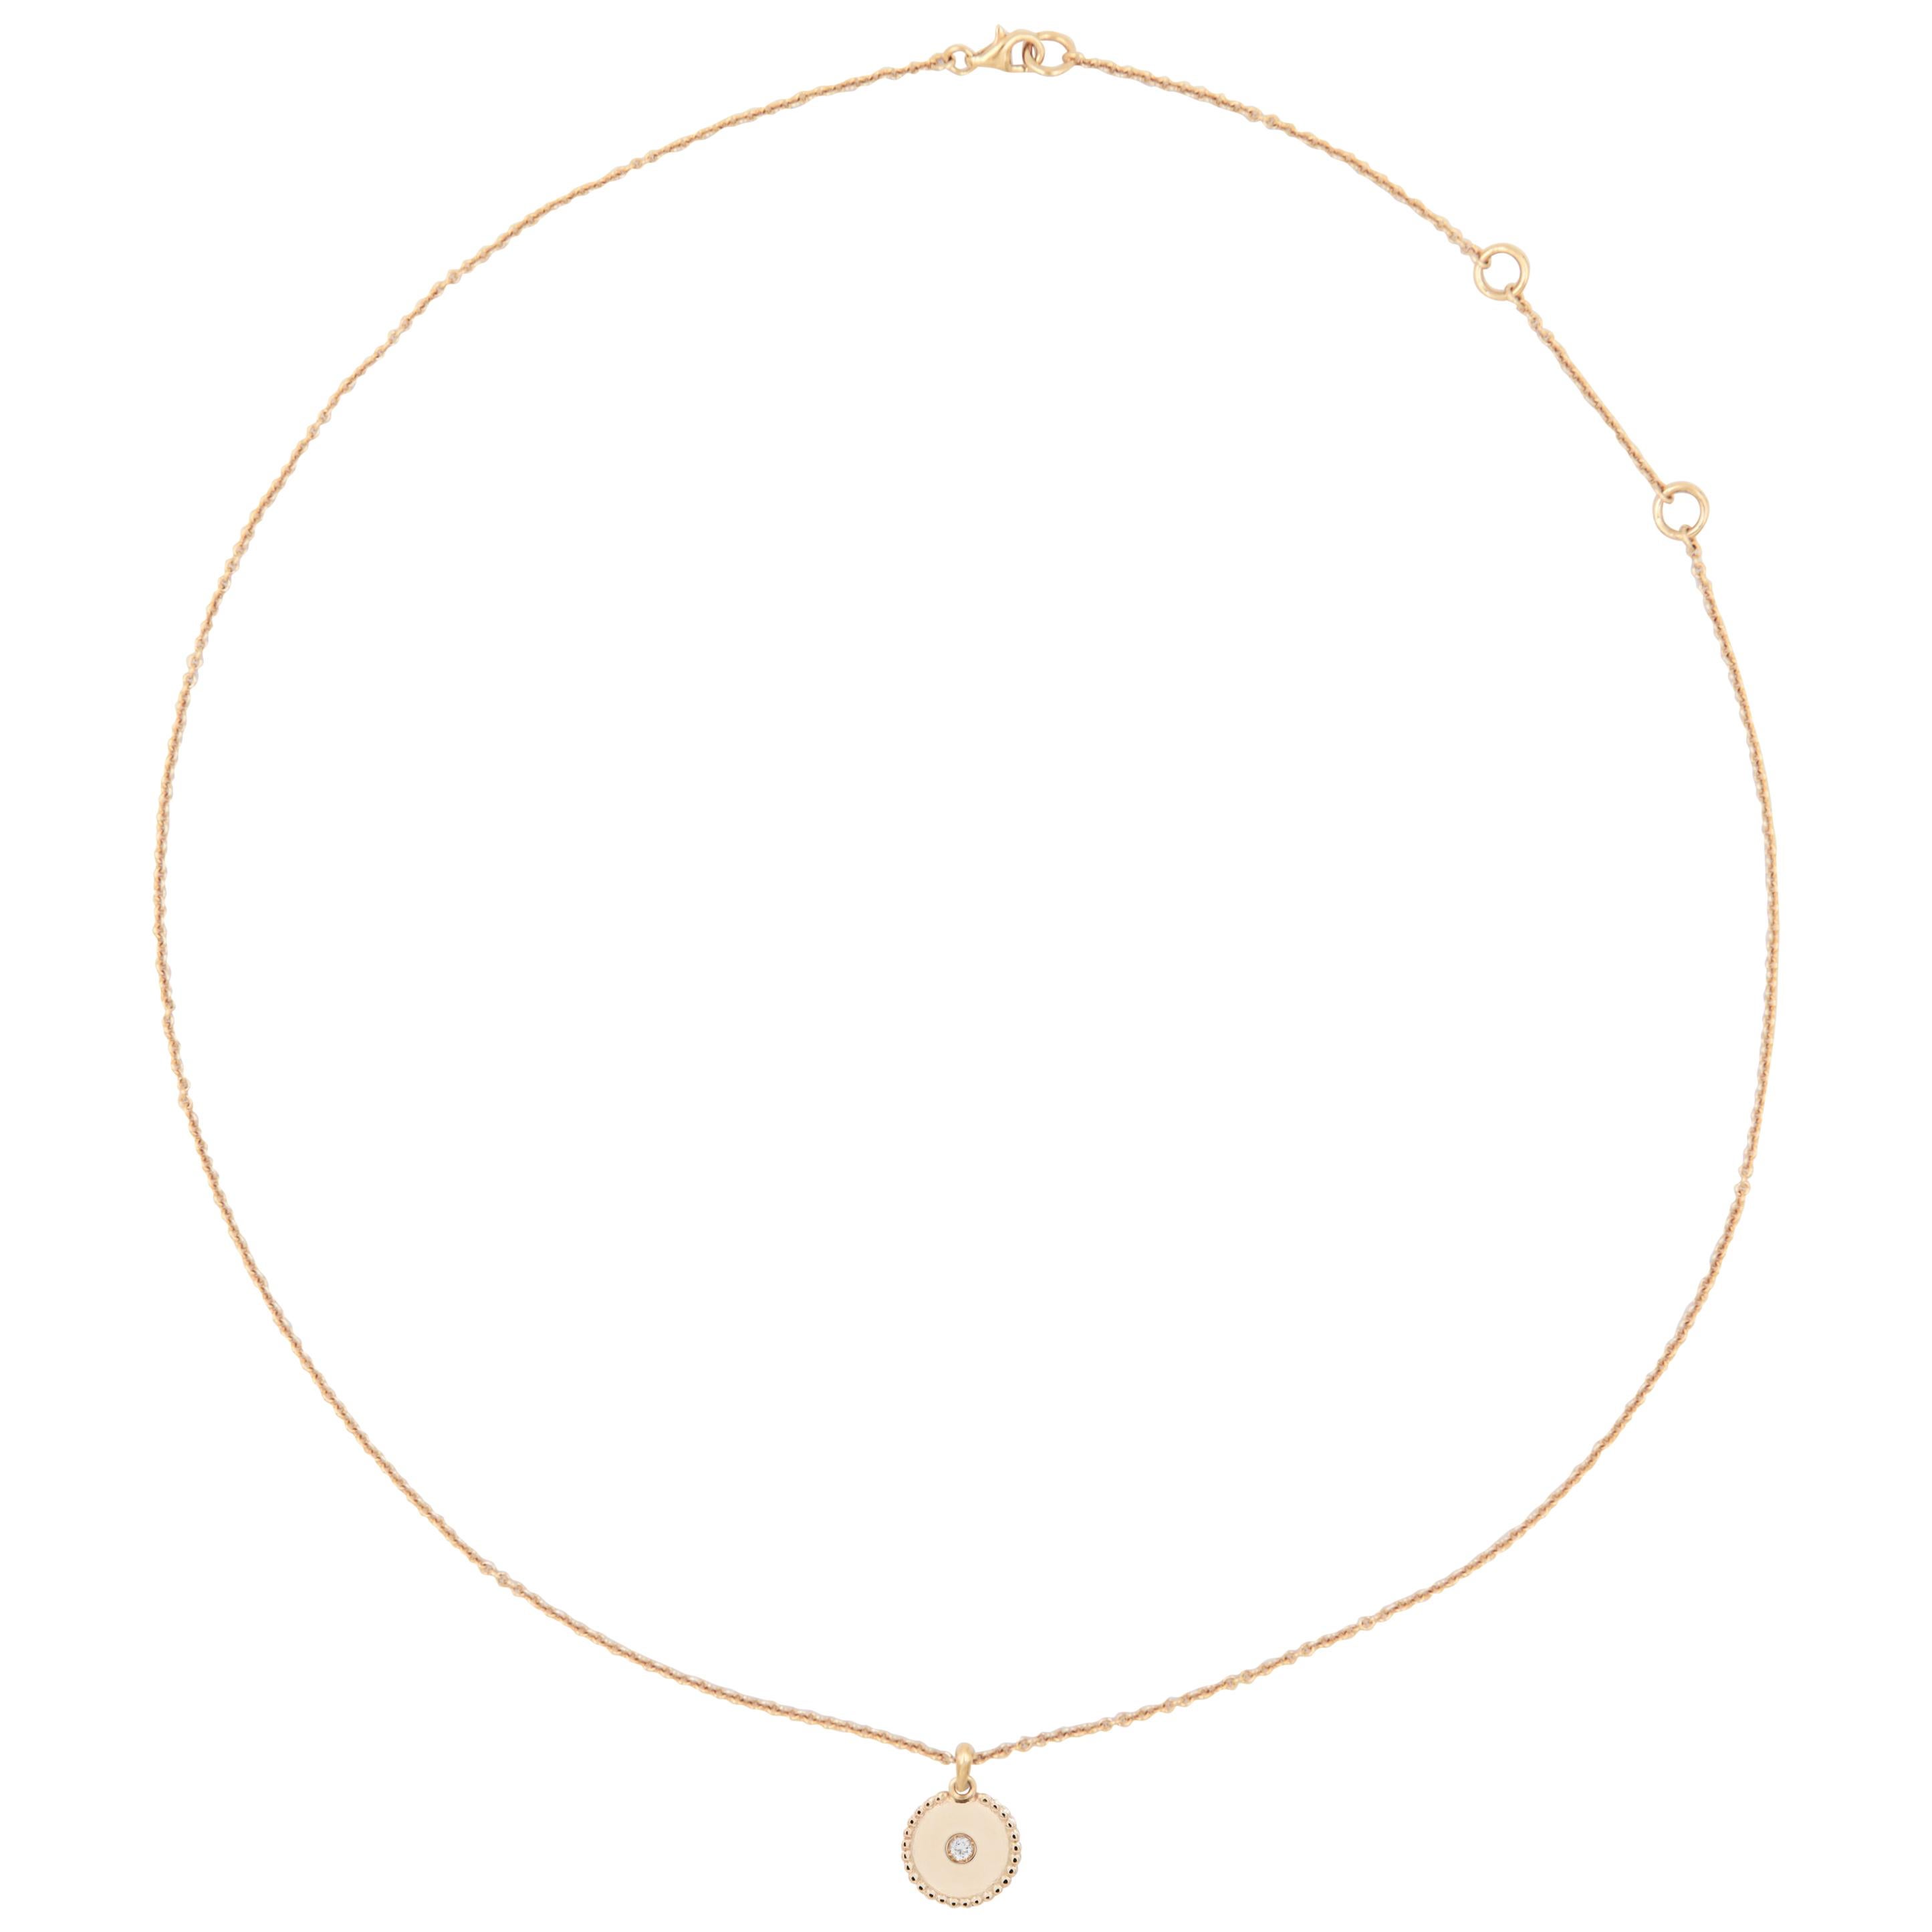 18 karat yellow gold necklace with a diamond-set pendant and adjustable chain. 

The chain is adjustable at a length of 42, 45 and 50 cm (16,5, 17,7 and 19,6 inch). 

This necklace forms part of Julia-Didon Cayre's 'Mezzanotte Milano' collection.